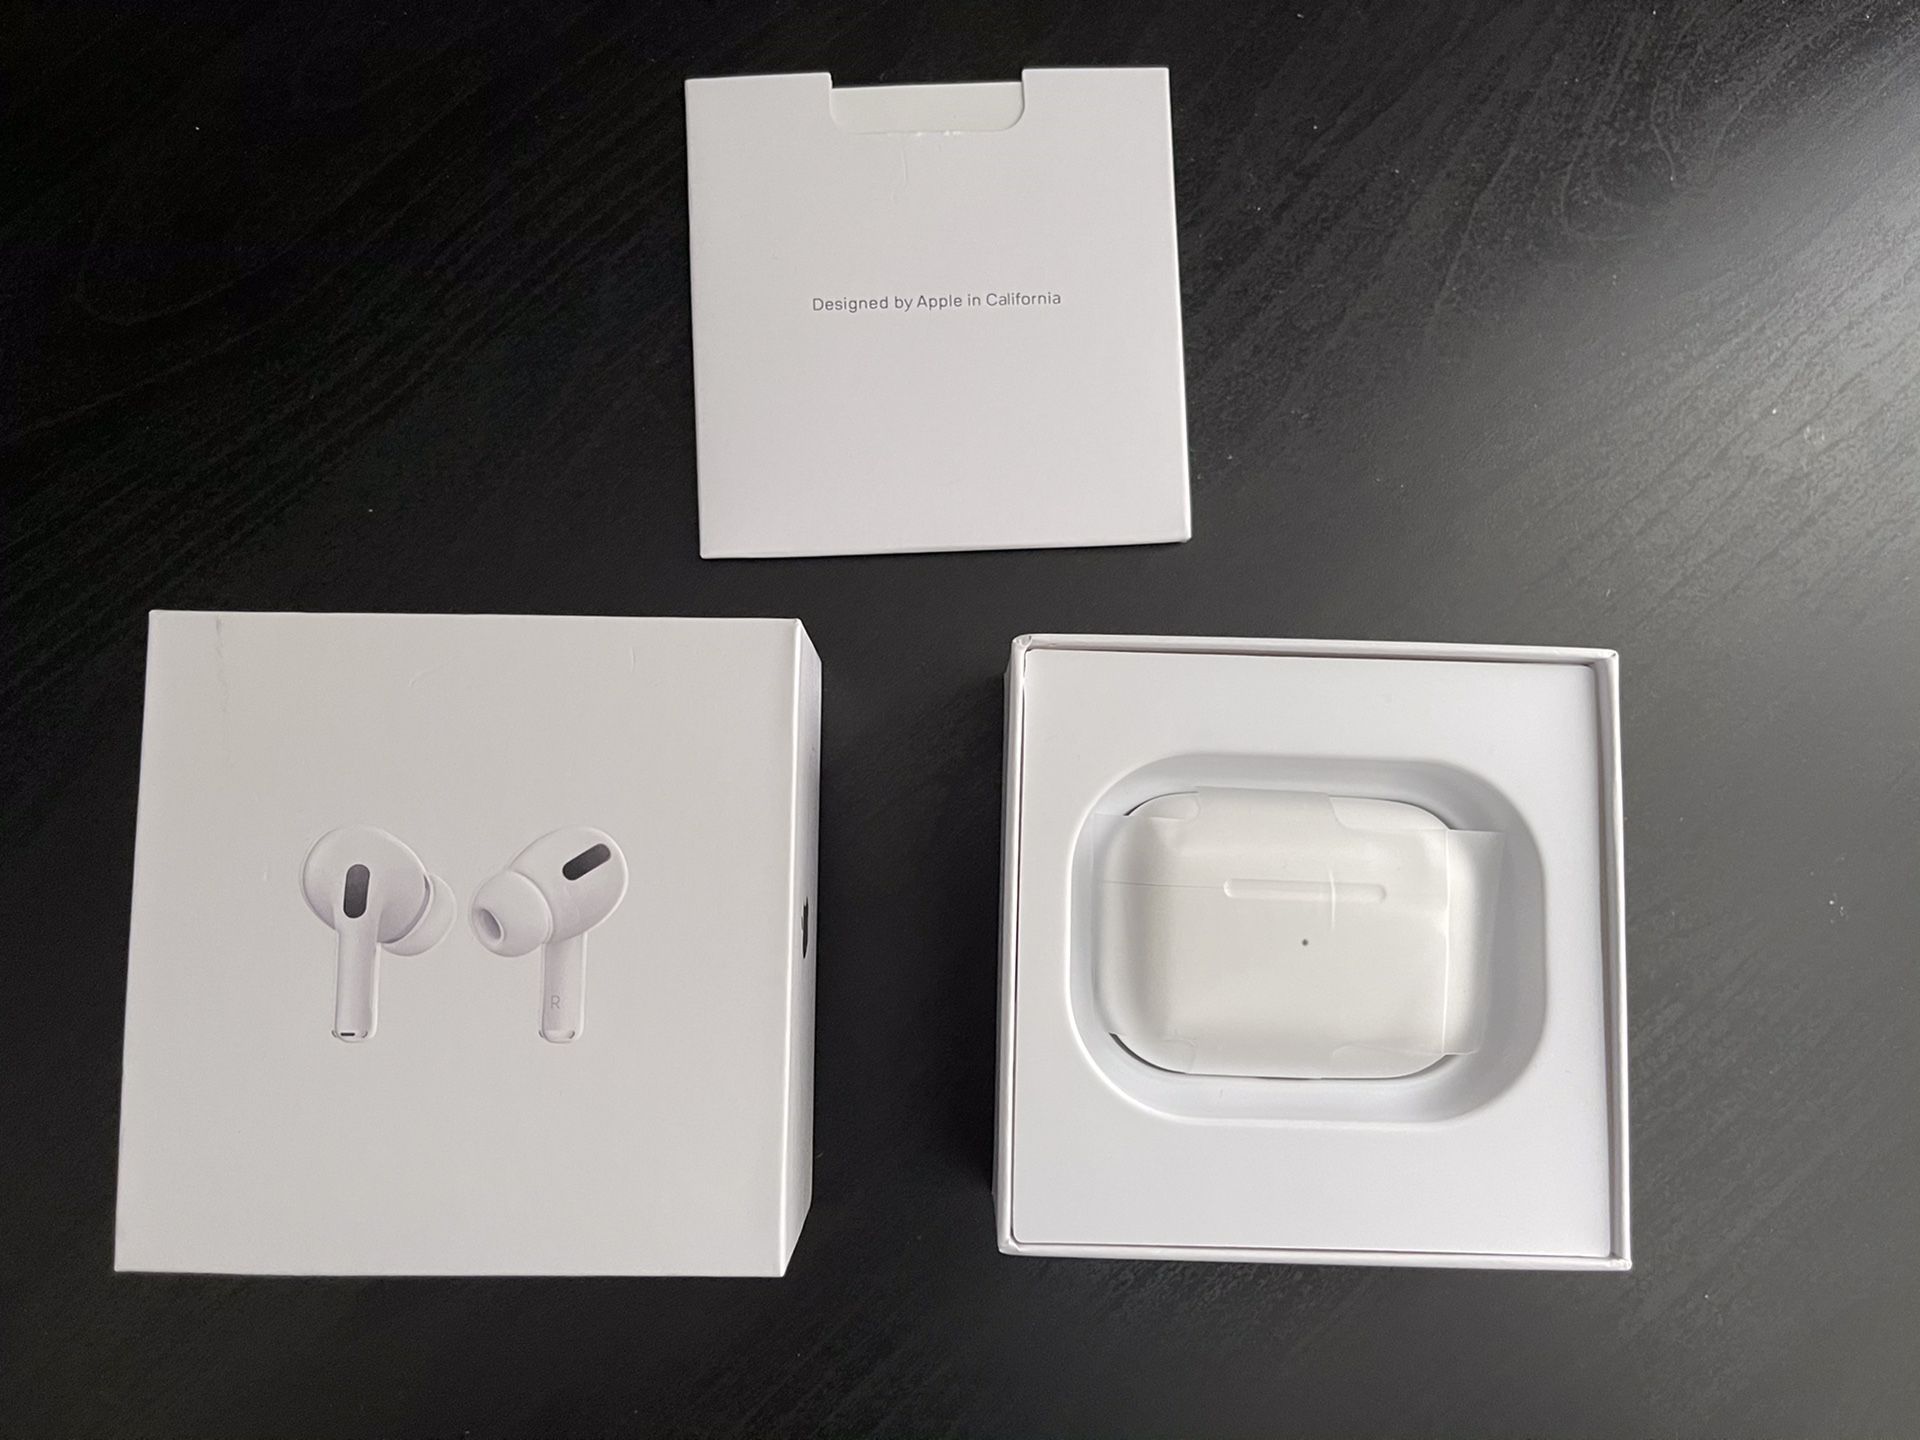 New never used AirPod pros